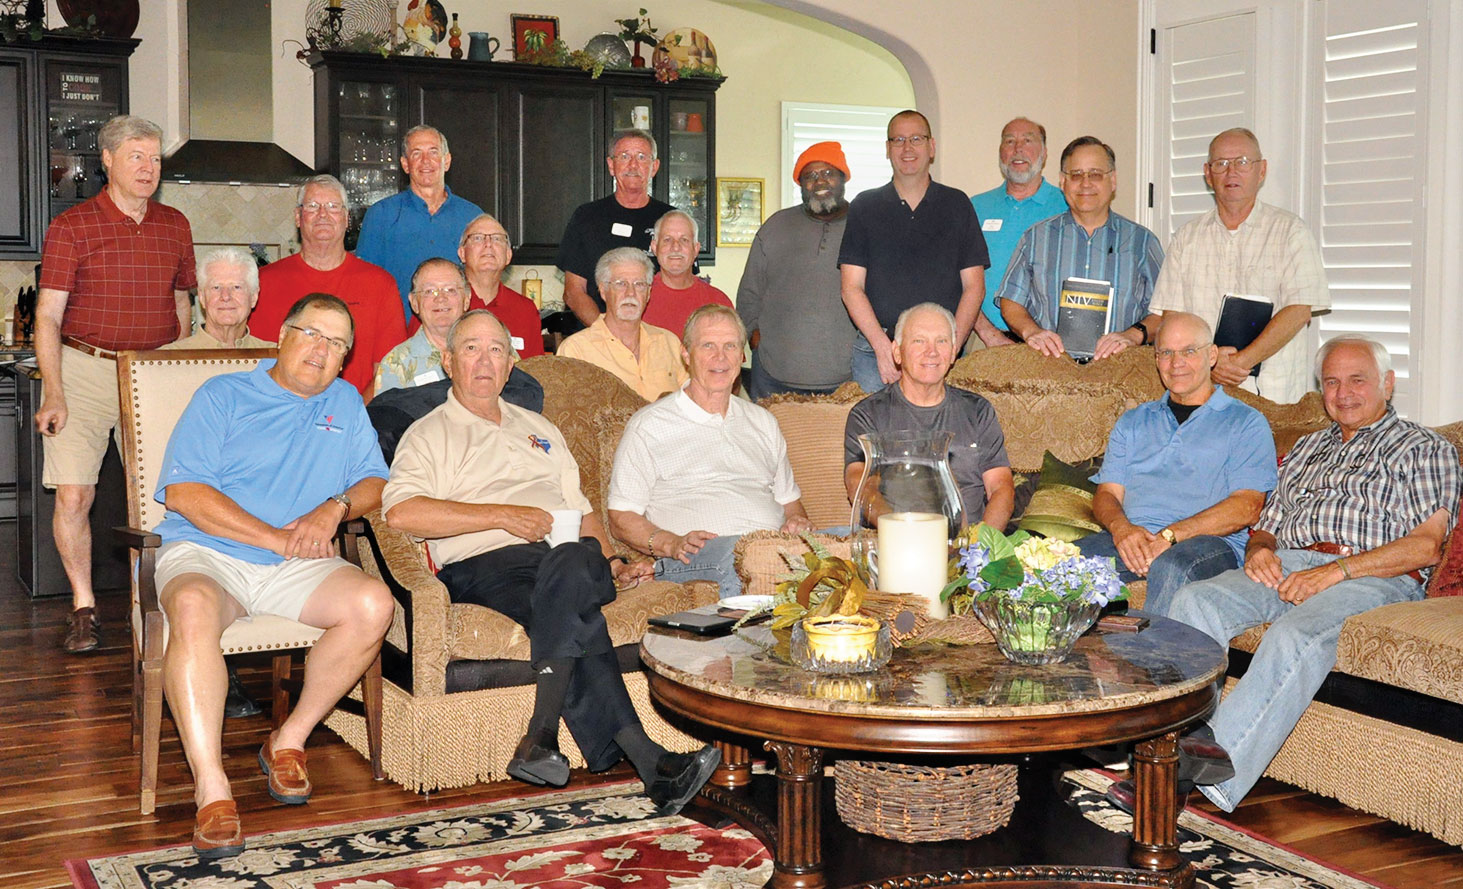 The men’s Bible study group